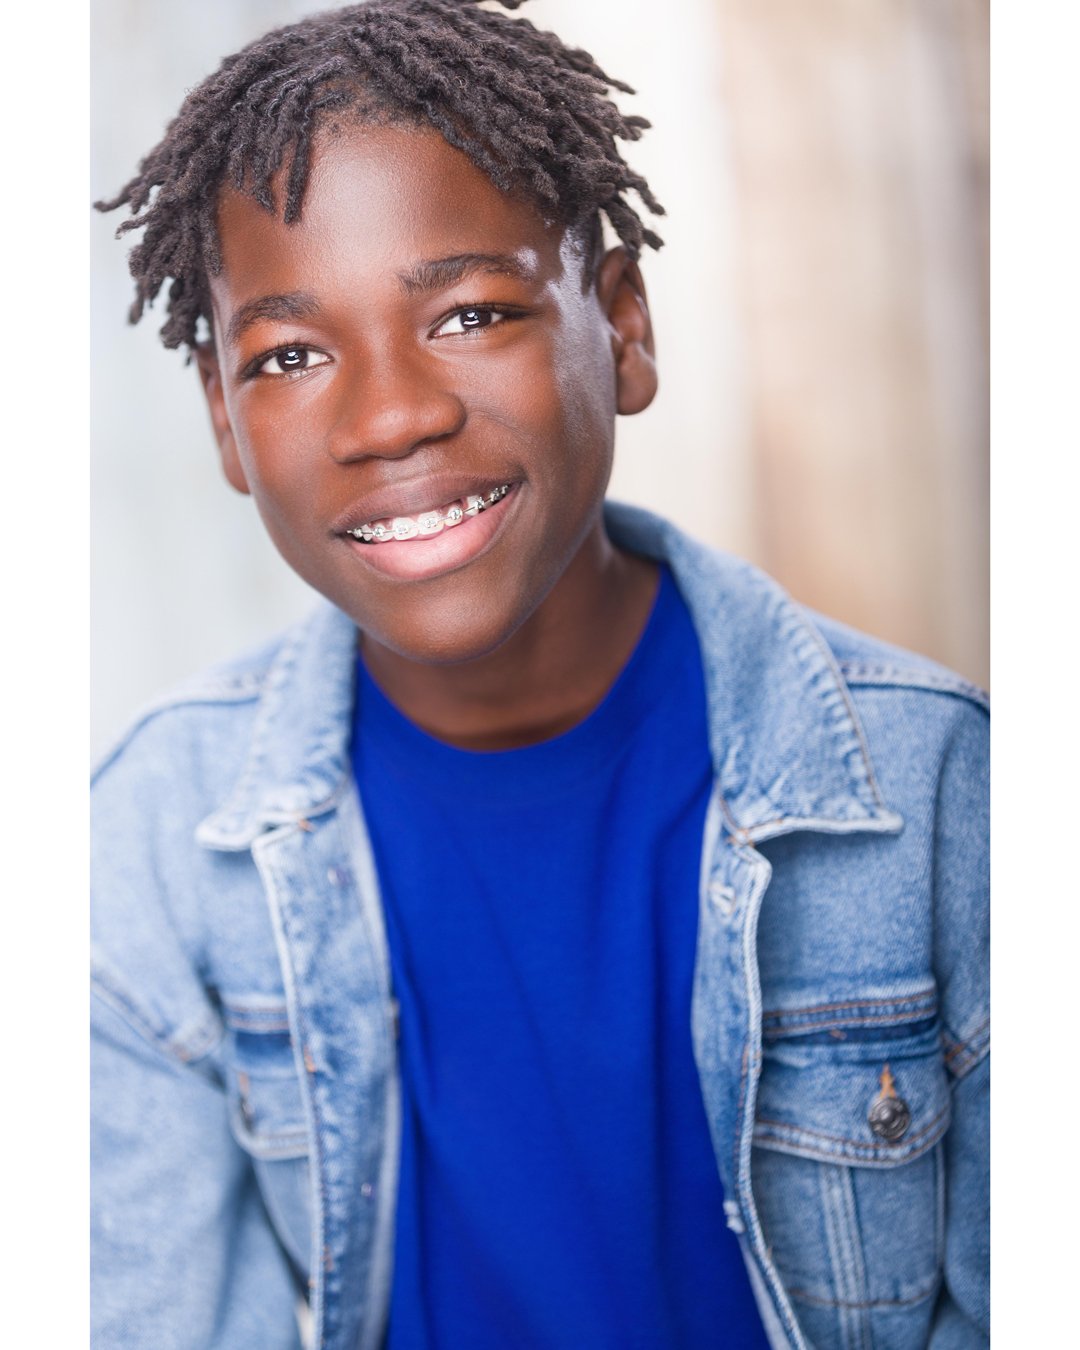 et Me Help You Get In The Room! (or wherever you tape your auditions!)

Headshots for Actors &amp; Creatives
Los Angeles, California
Kid/Youth Headshots:

🎭 : Byron

Visit the website for rates, schedules and other info
www.PhotosByJamaal.com (link 